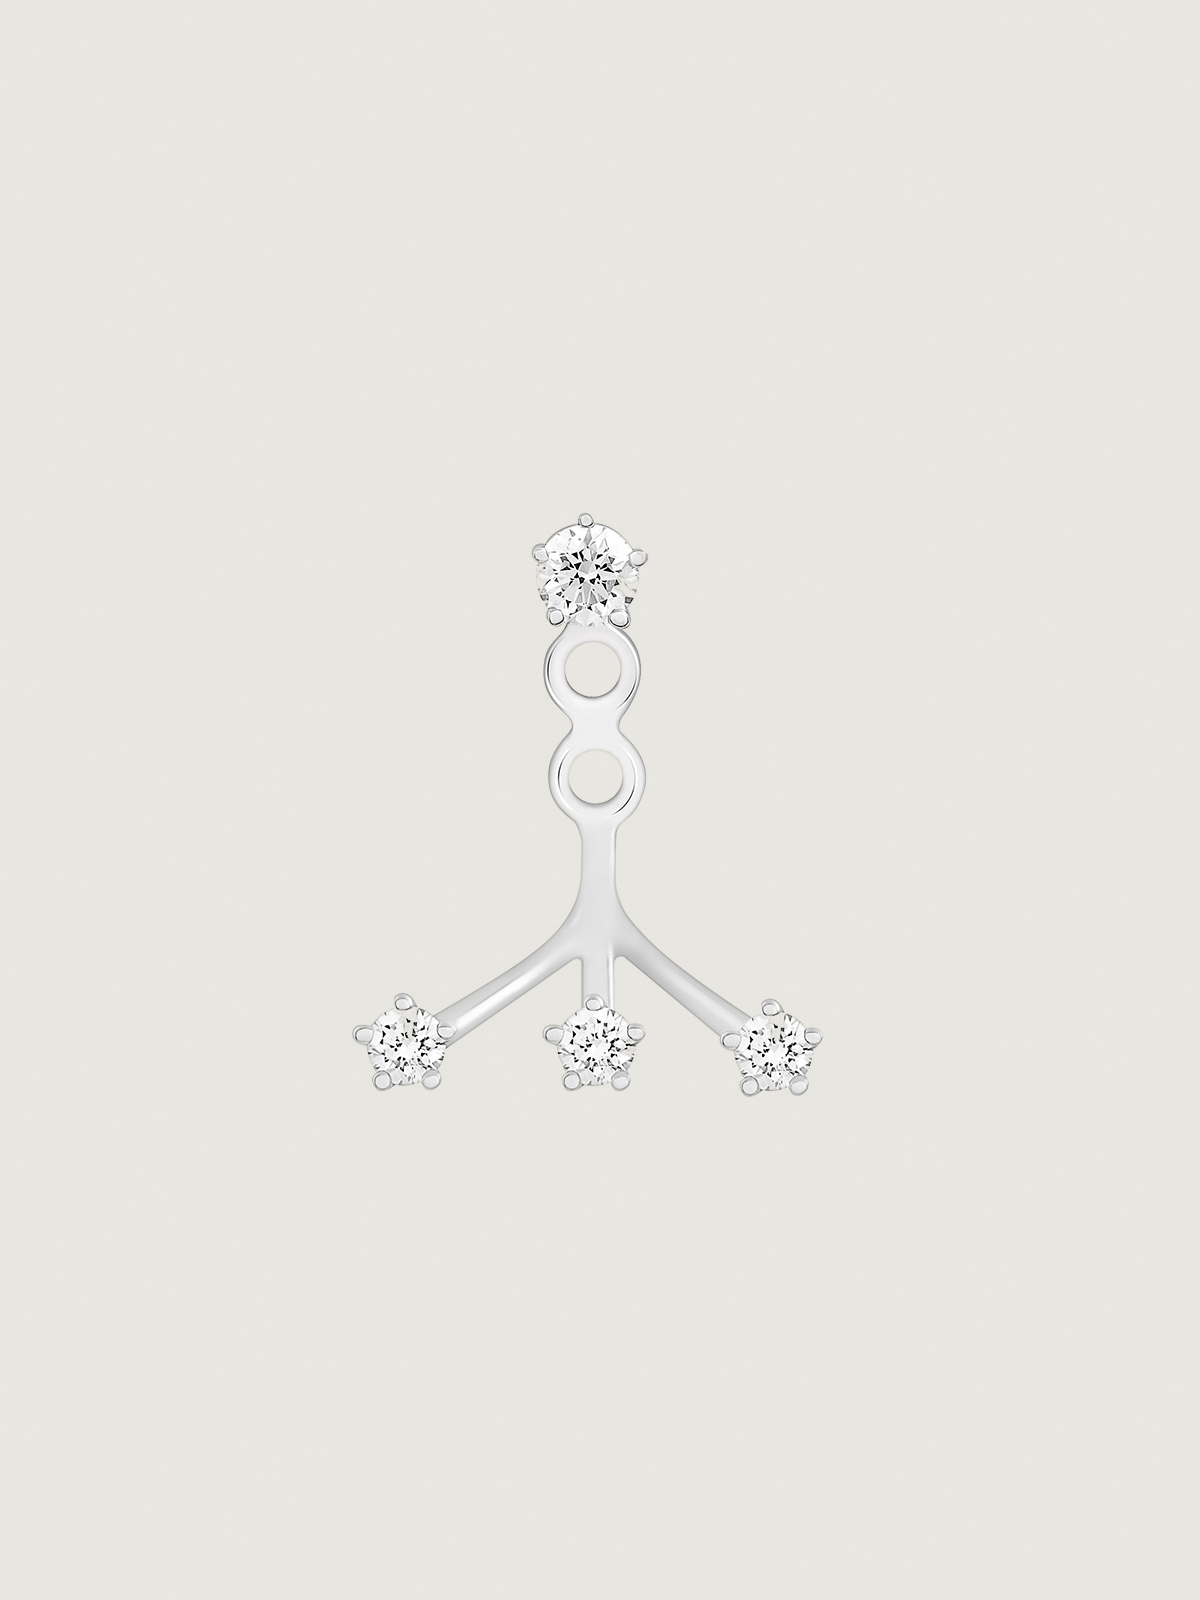 Individual Ear Jacket earring made of 18K white gold with diamonds and stars.